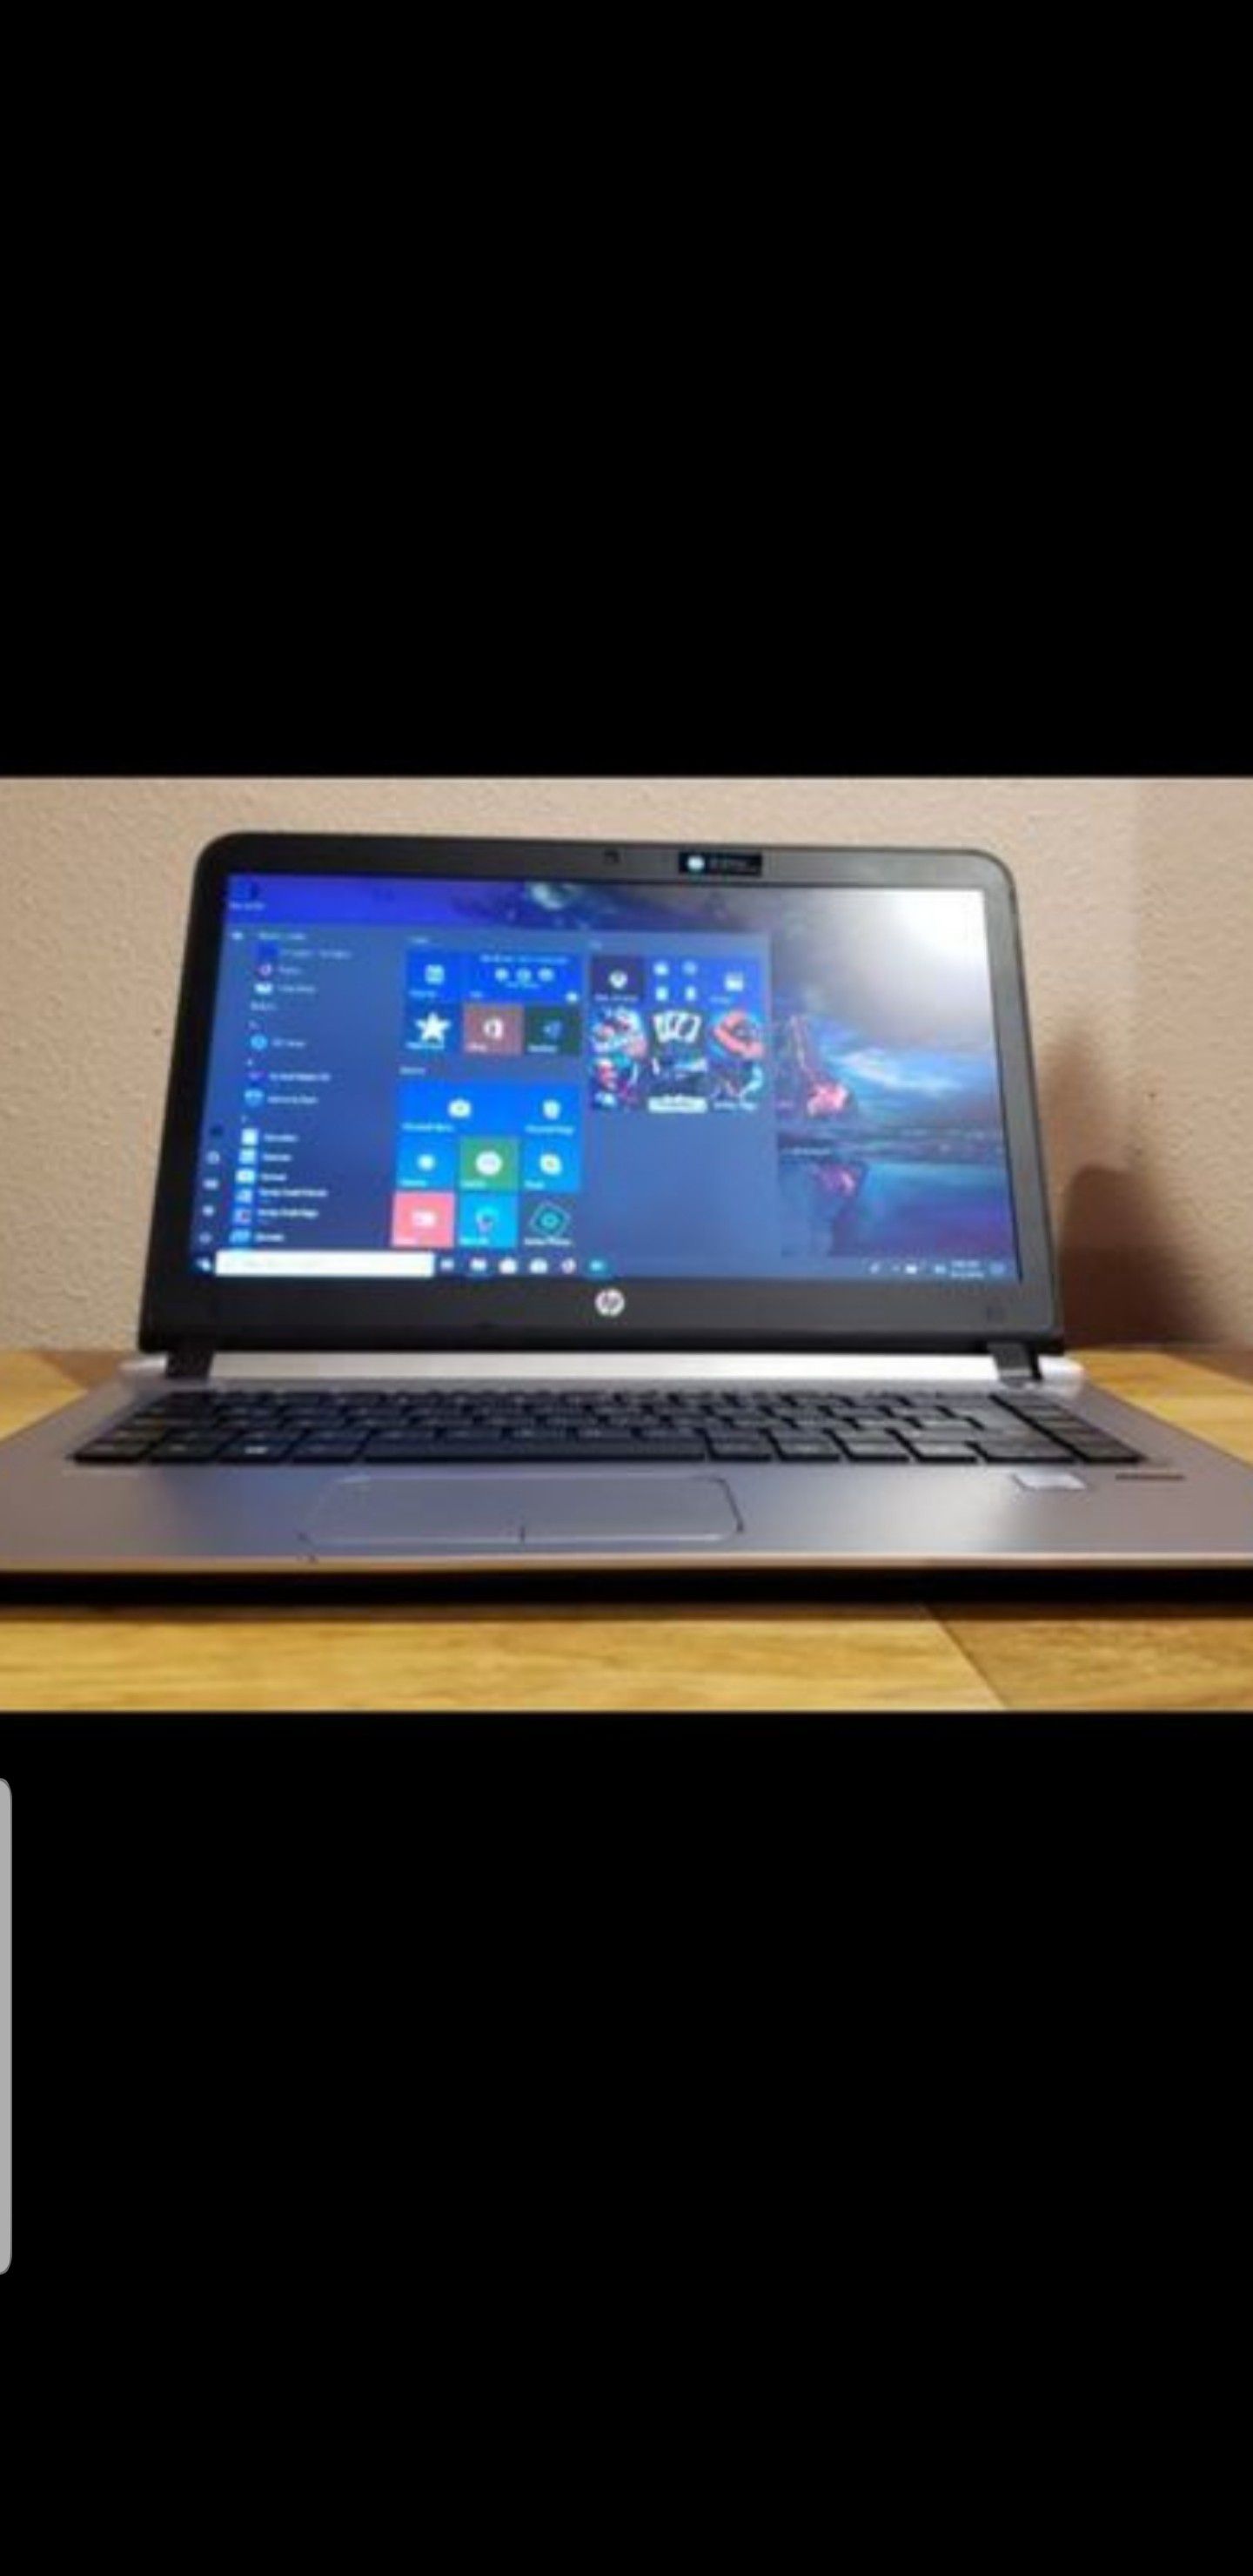 LAPTOP /NOTEBOOK HP "14in" FAST i5-INTEL/TurboMax@2.80GHz,1000GB-HDrive,12GB-RAM,USB's,Win10,WiFi+Was$399,know SALE-$250/Firm